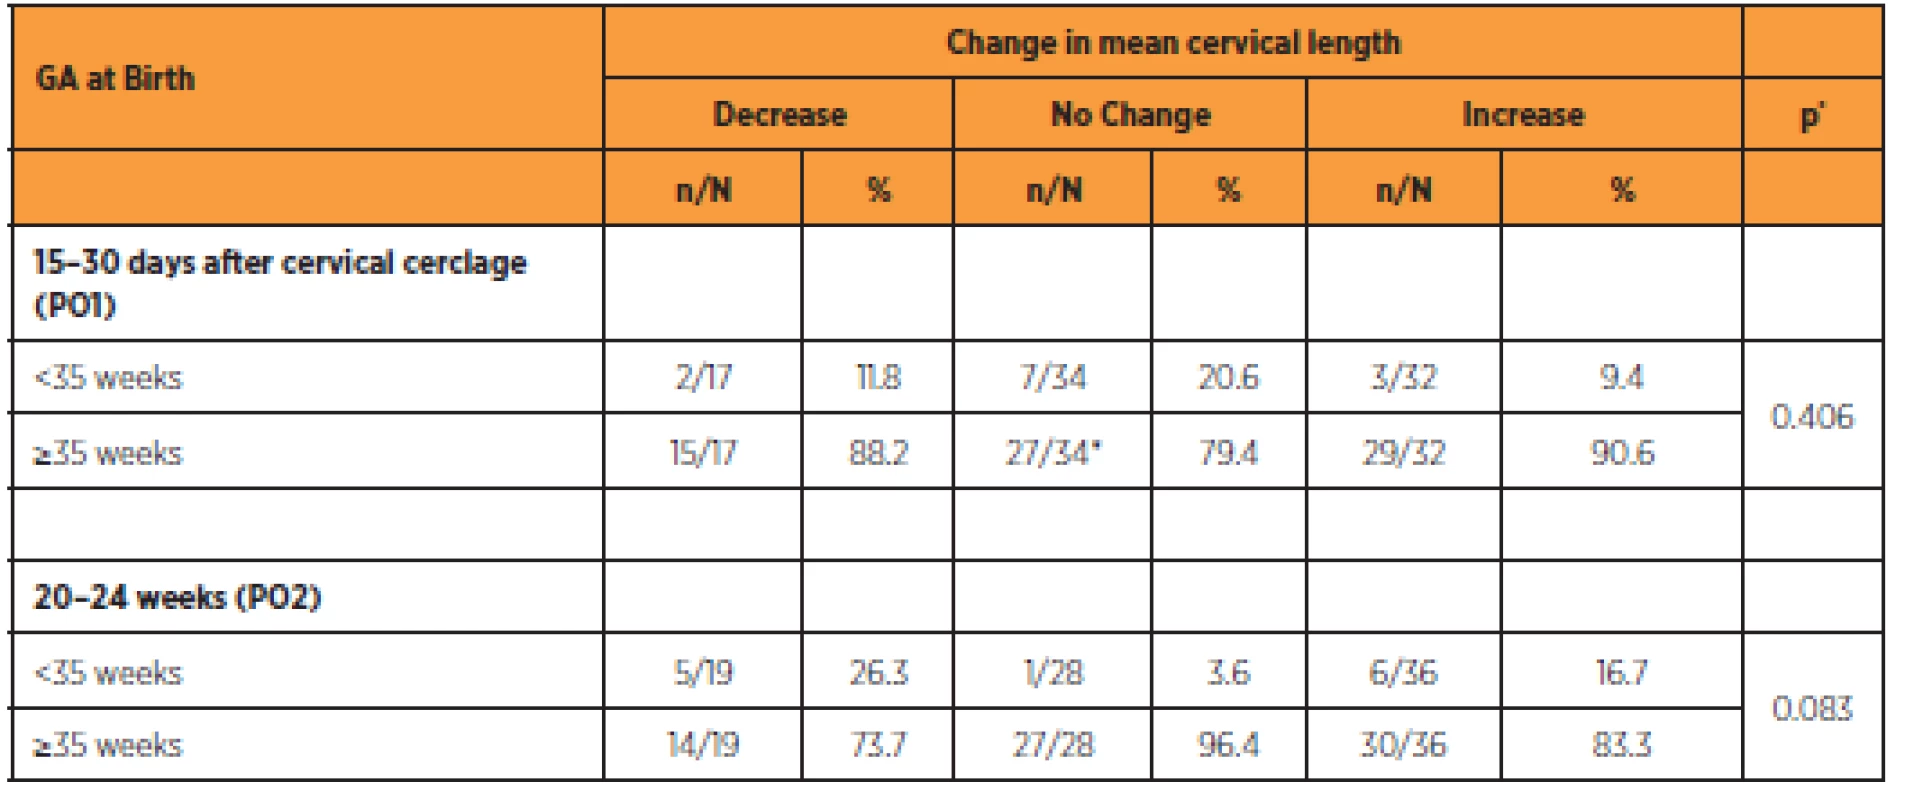 Comparison between changes in cervical length and delivery < 35 weeks of gestation